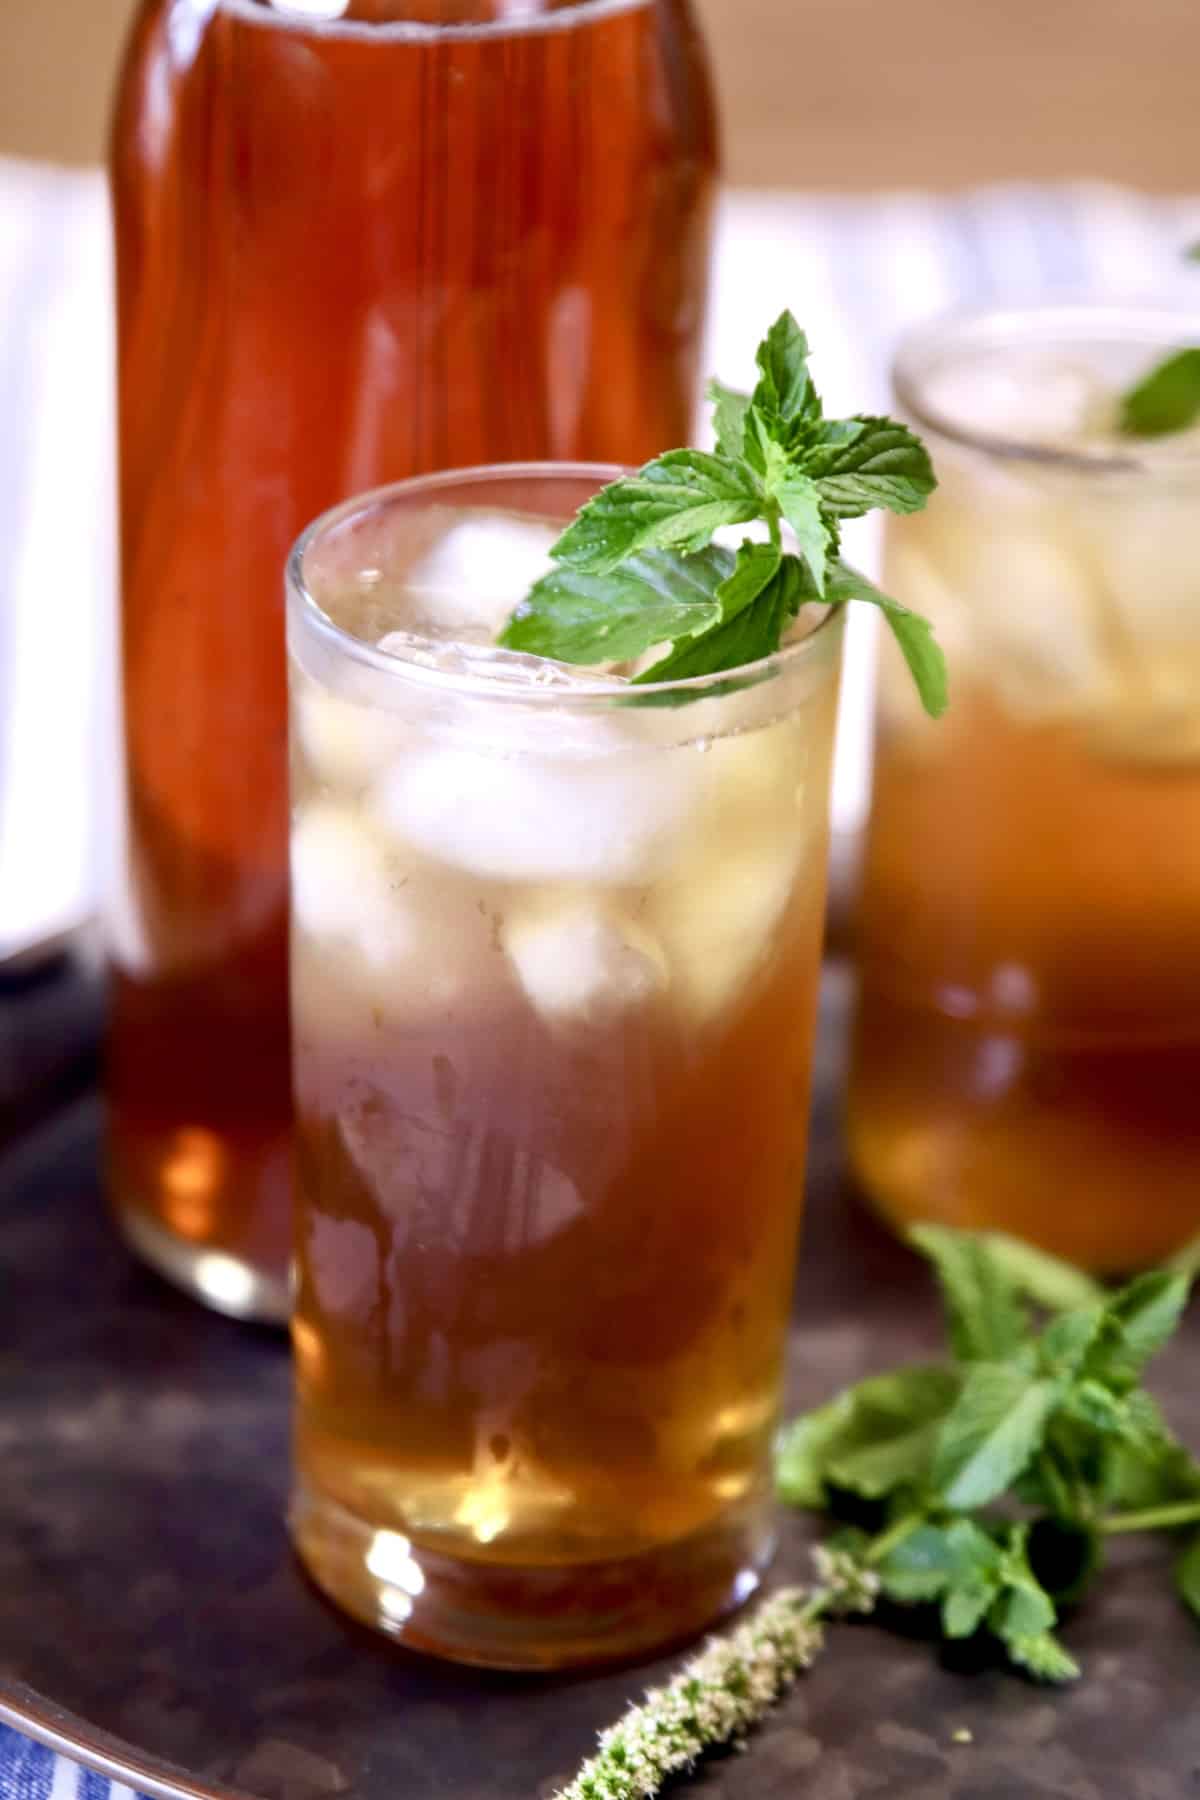 Glasses of spiked iced tea with mint garnish.